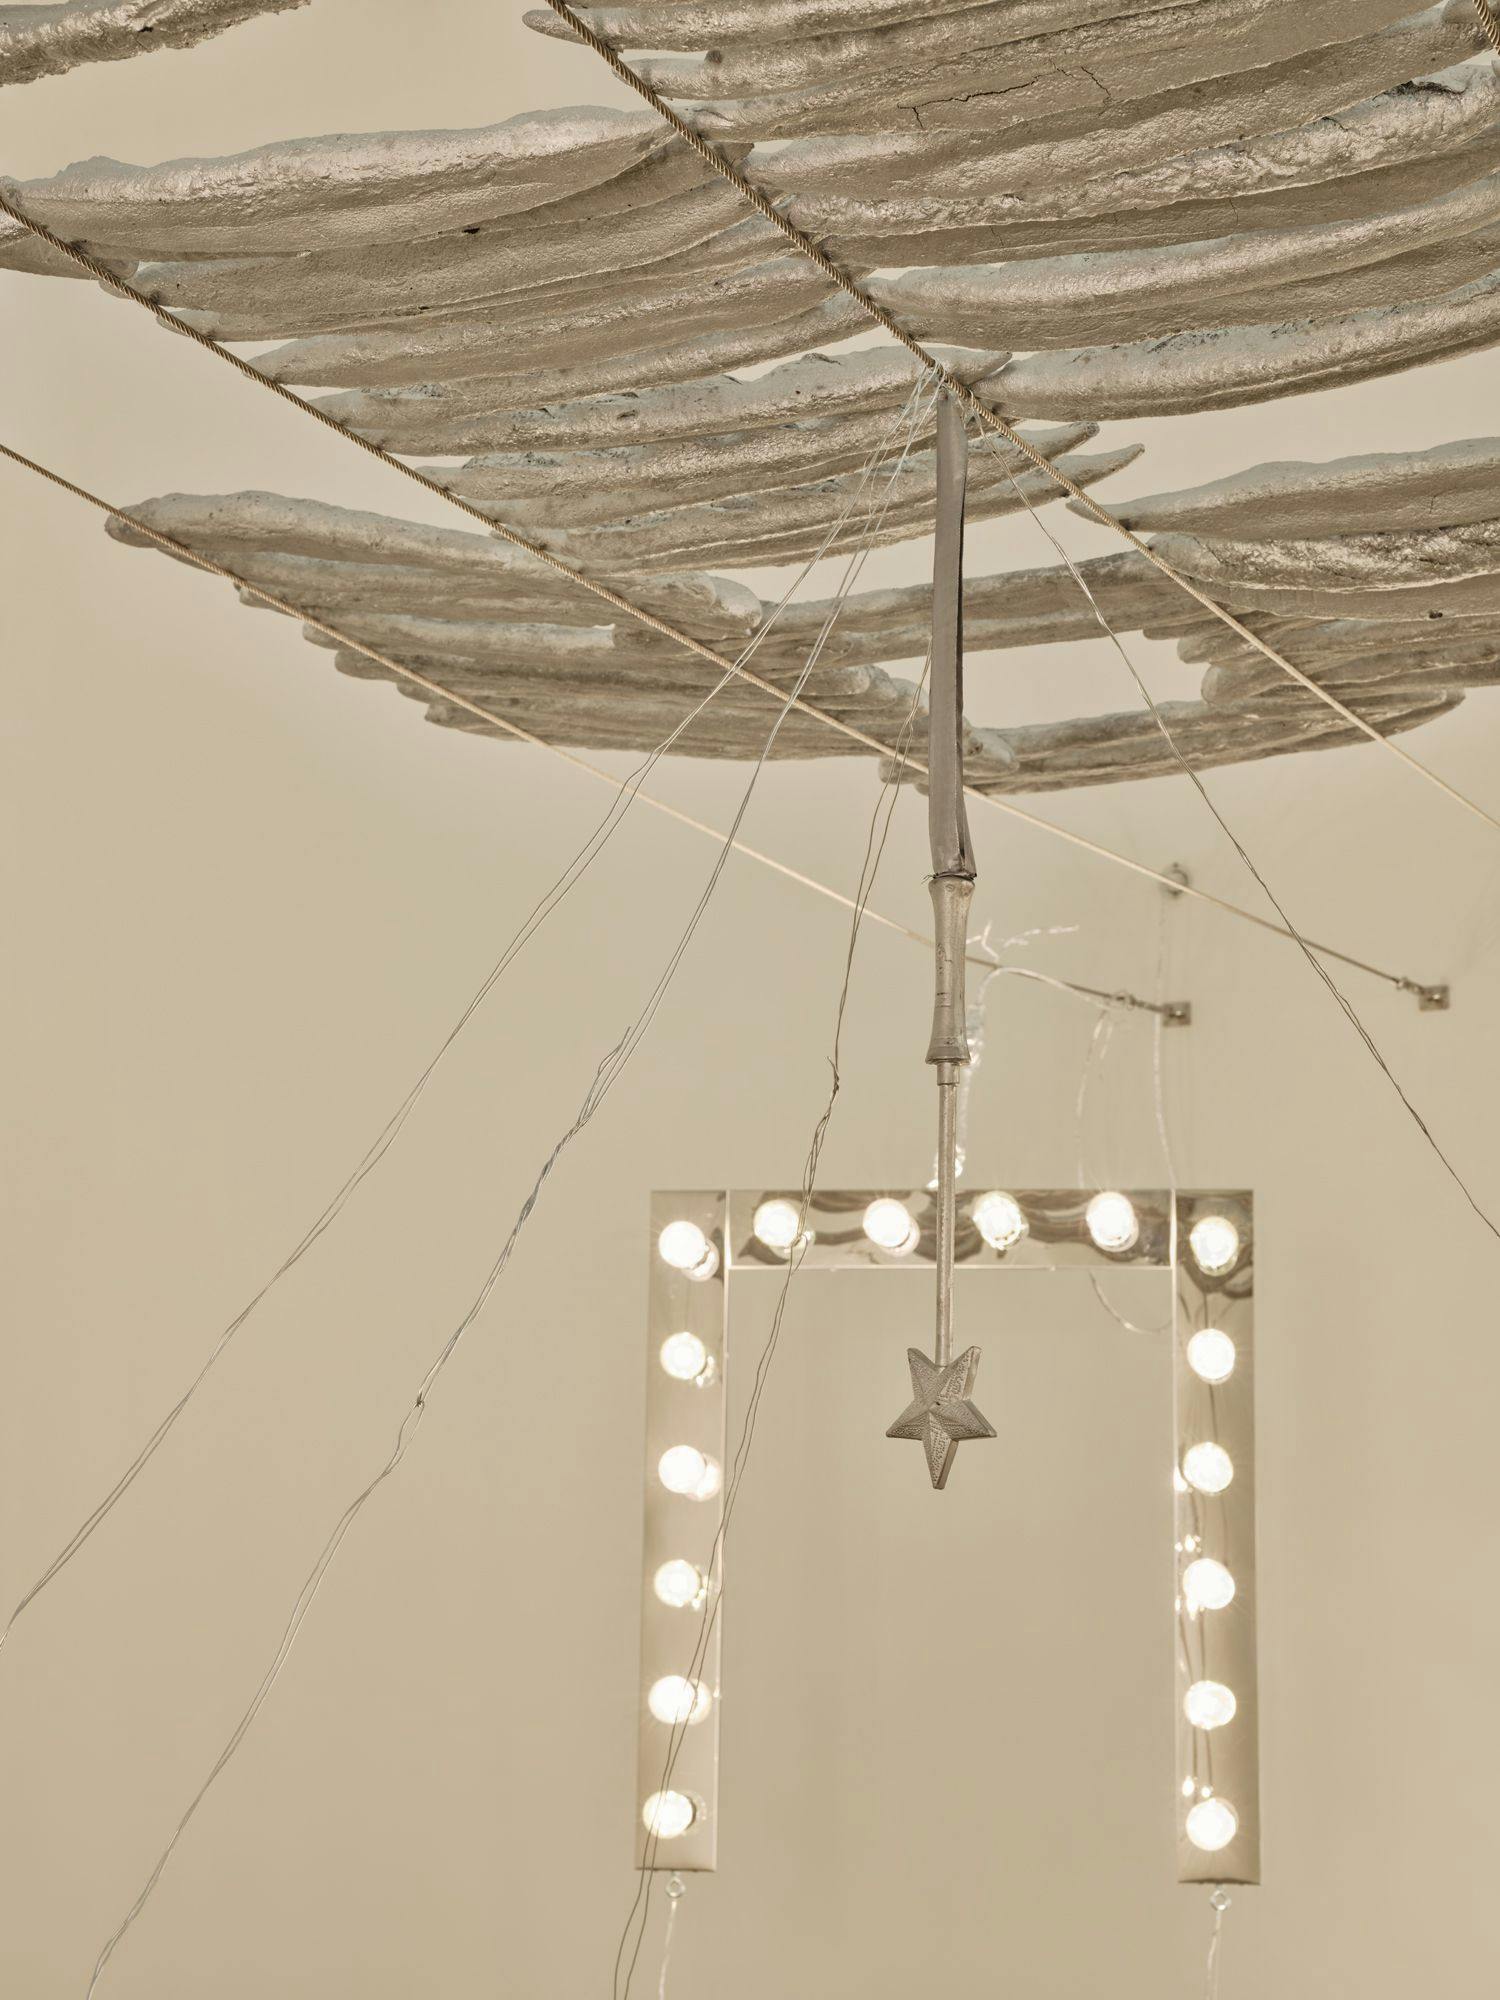 A silver magic wand, a vanity light and dozens of painted baguettes are held by wire fixed to the wall. Four wires hang from the silver wand and stretch out of frame.